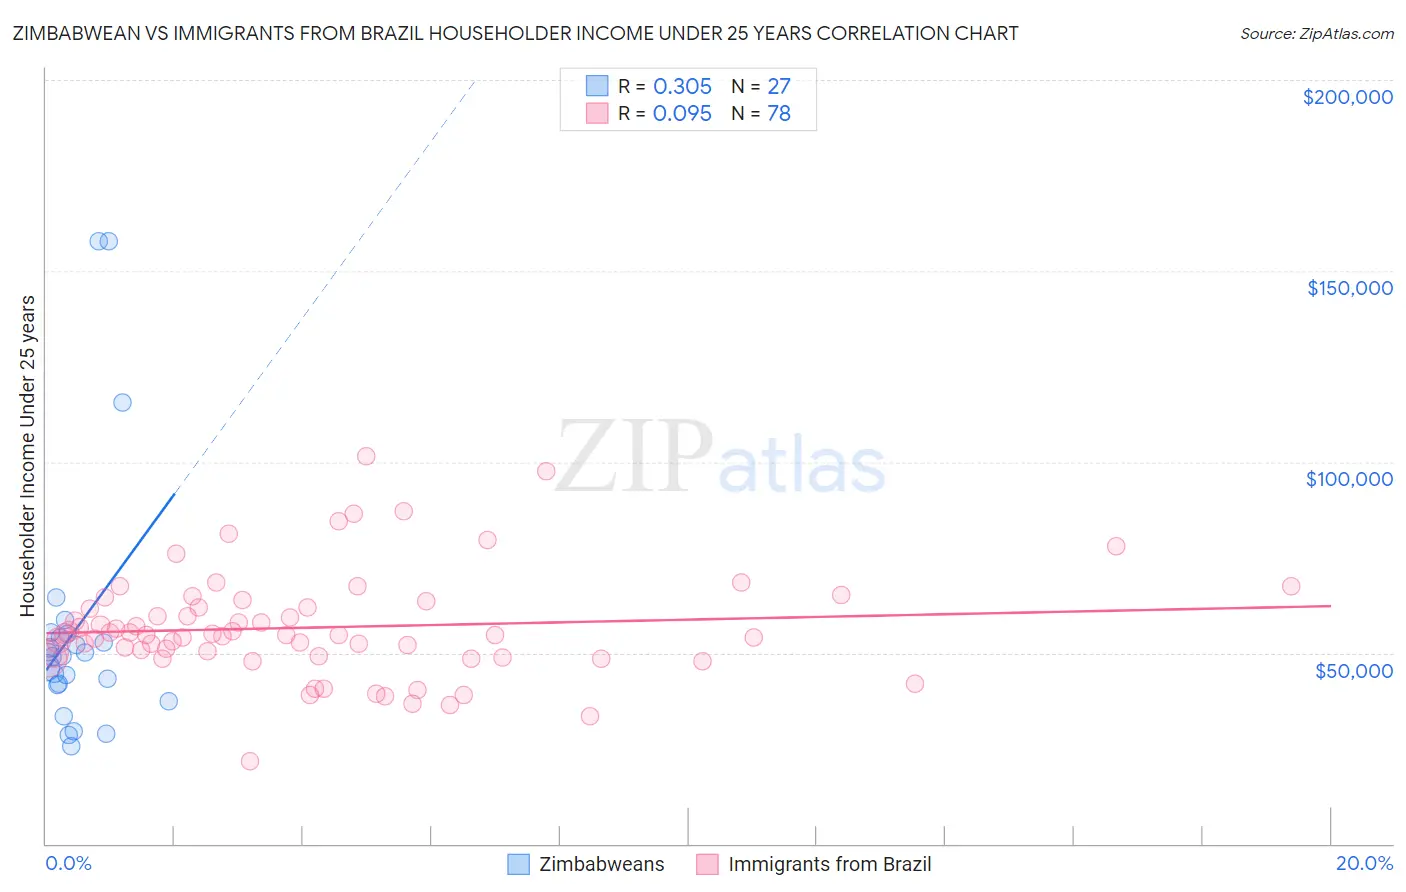 Zimbabwean vs Immigrants from Brazil Householder Income Under 25 years